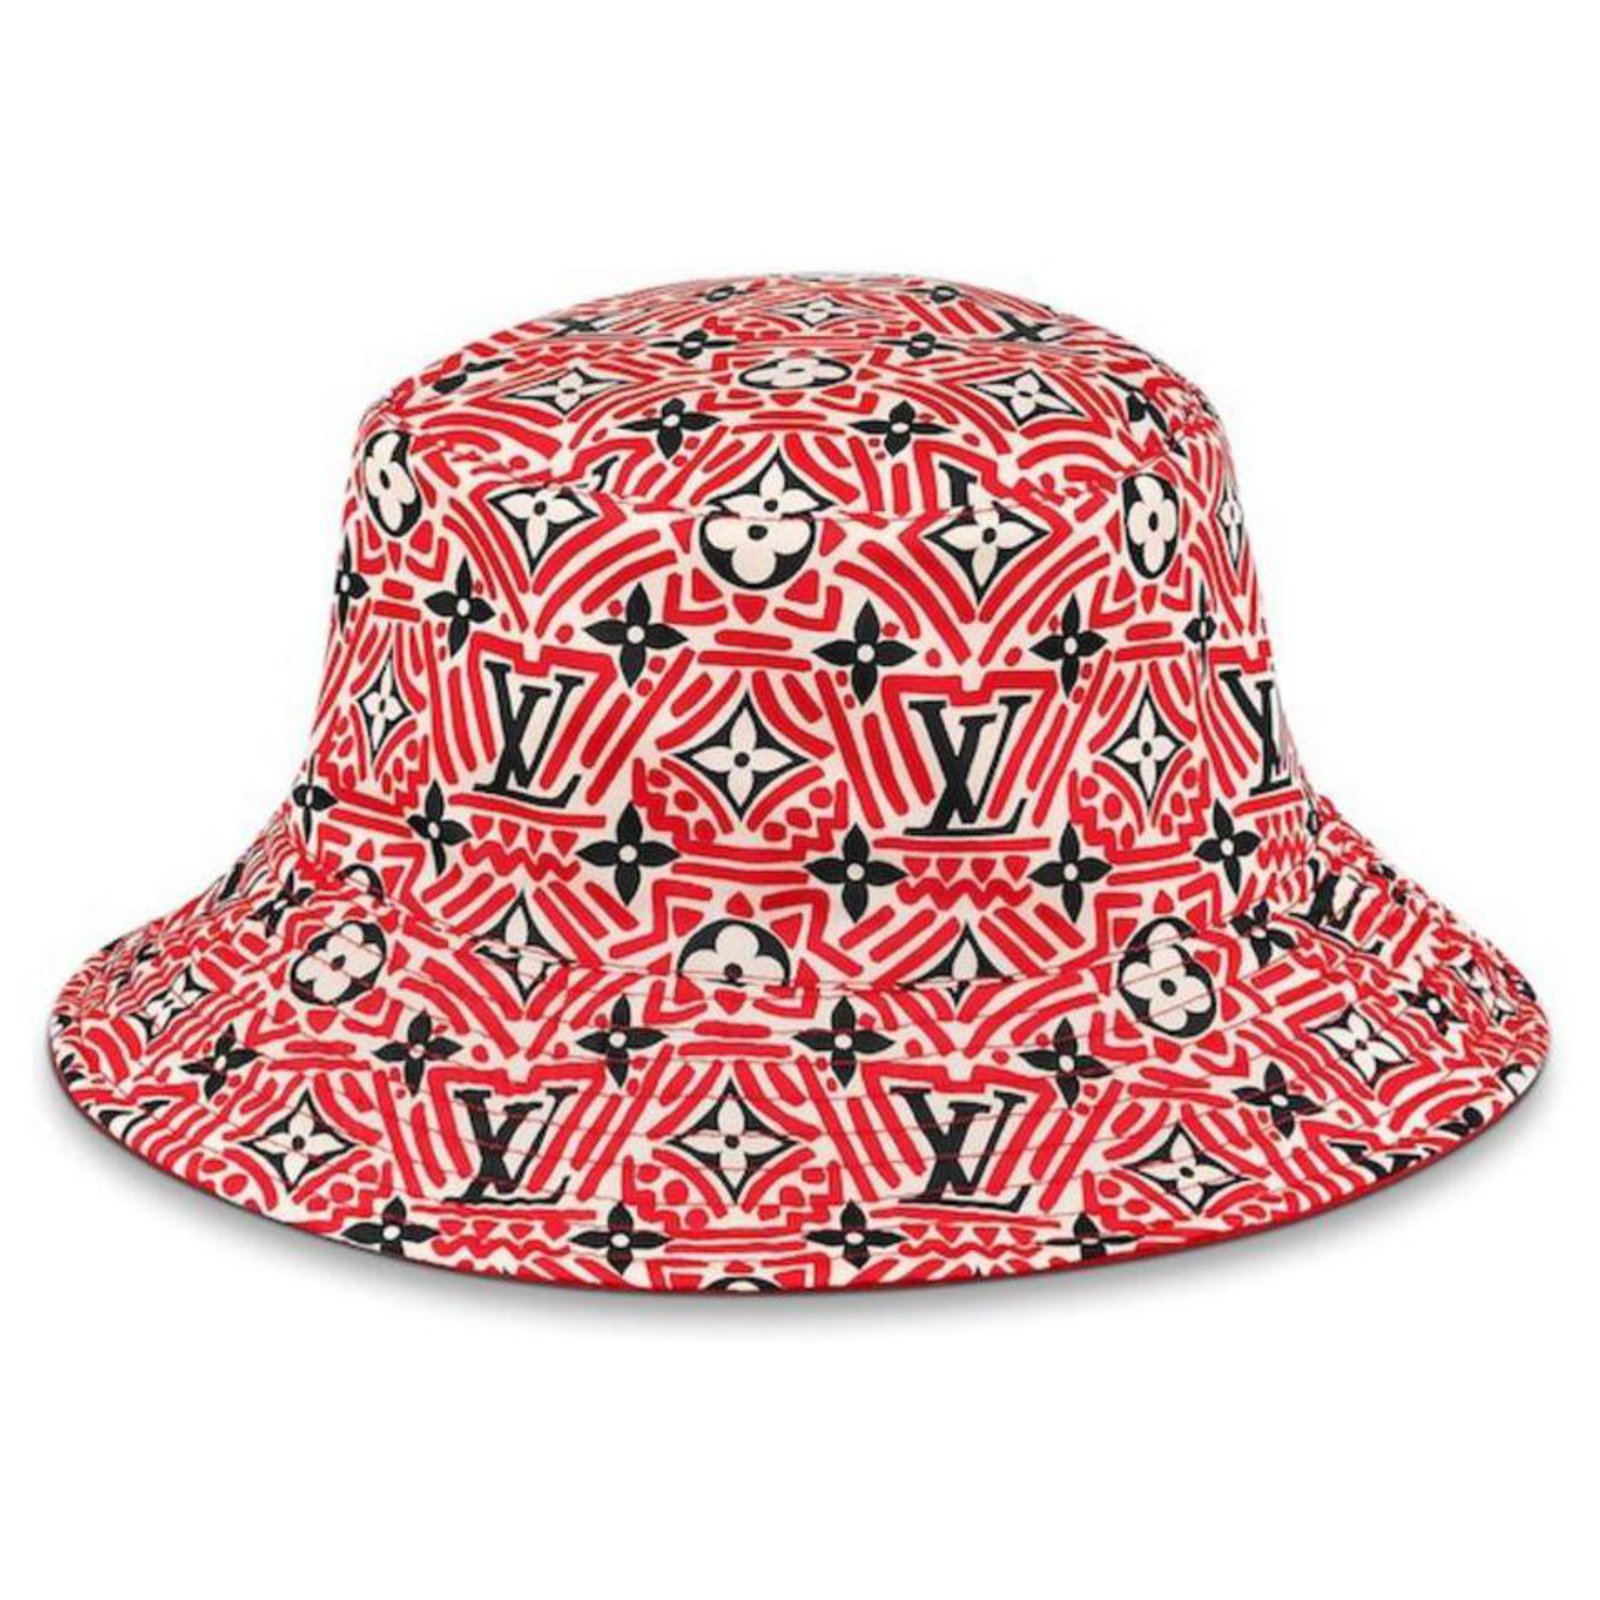 NWT Louis Vuitton Tapestry Reversible Bucket Hat Size 60 100% Authentic  RARE!!